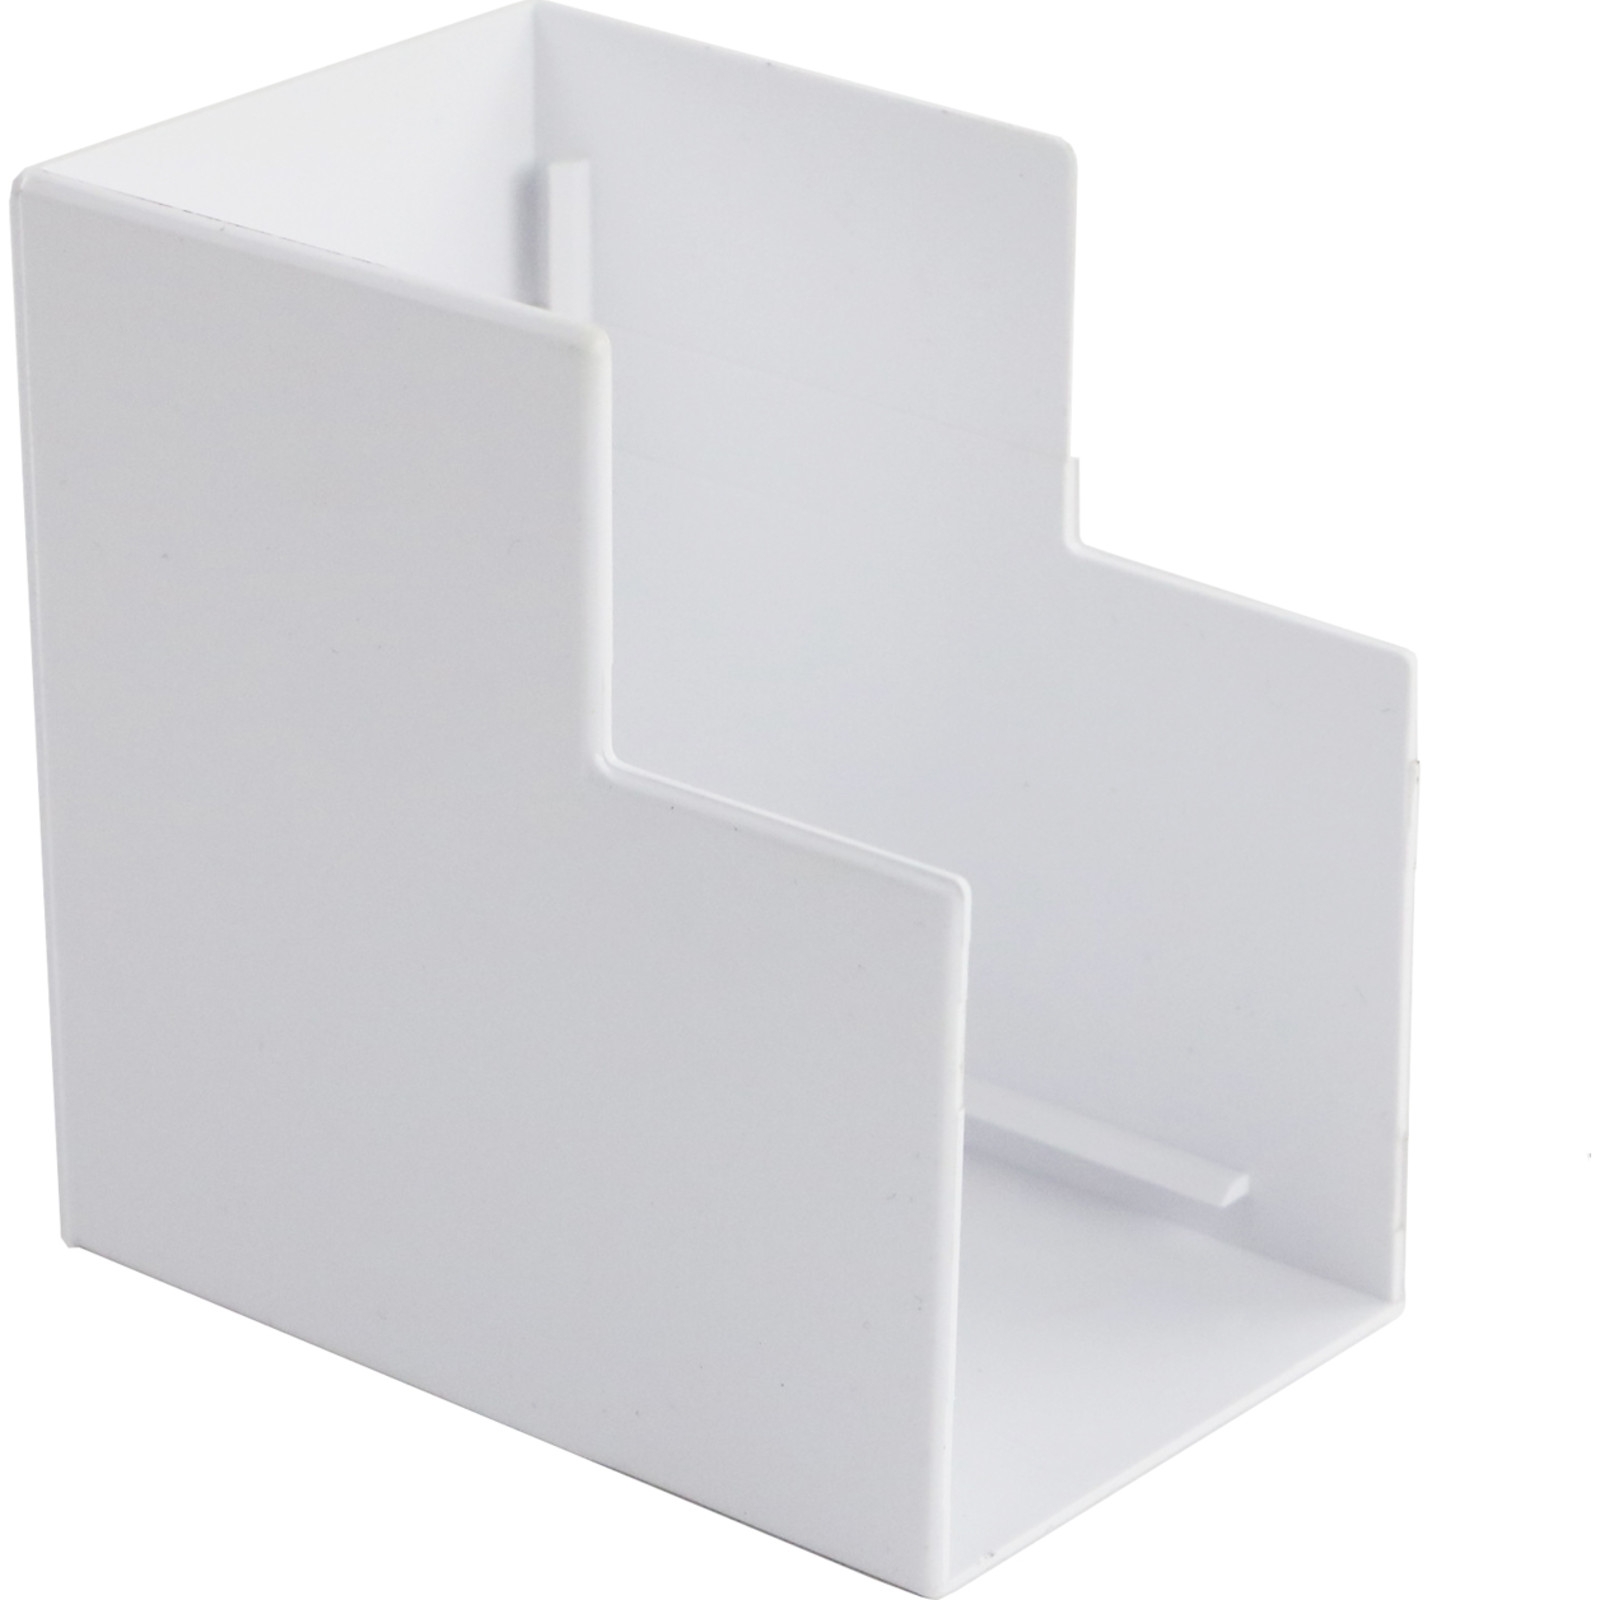 Maxi Trunking Fitting 50 x 50mm External Angle